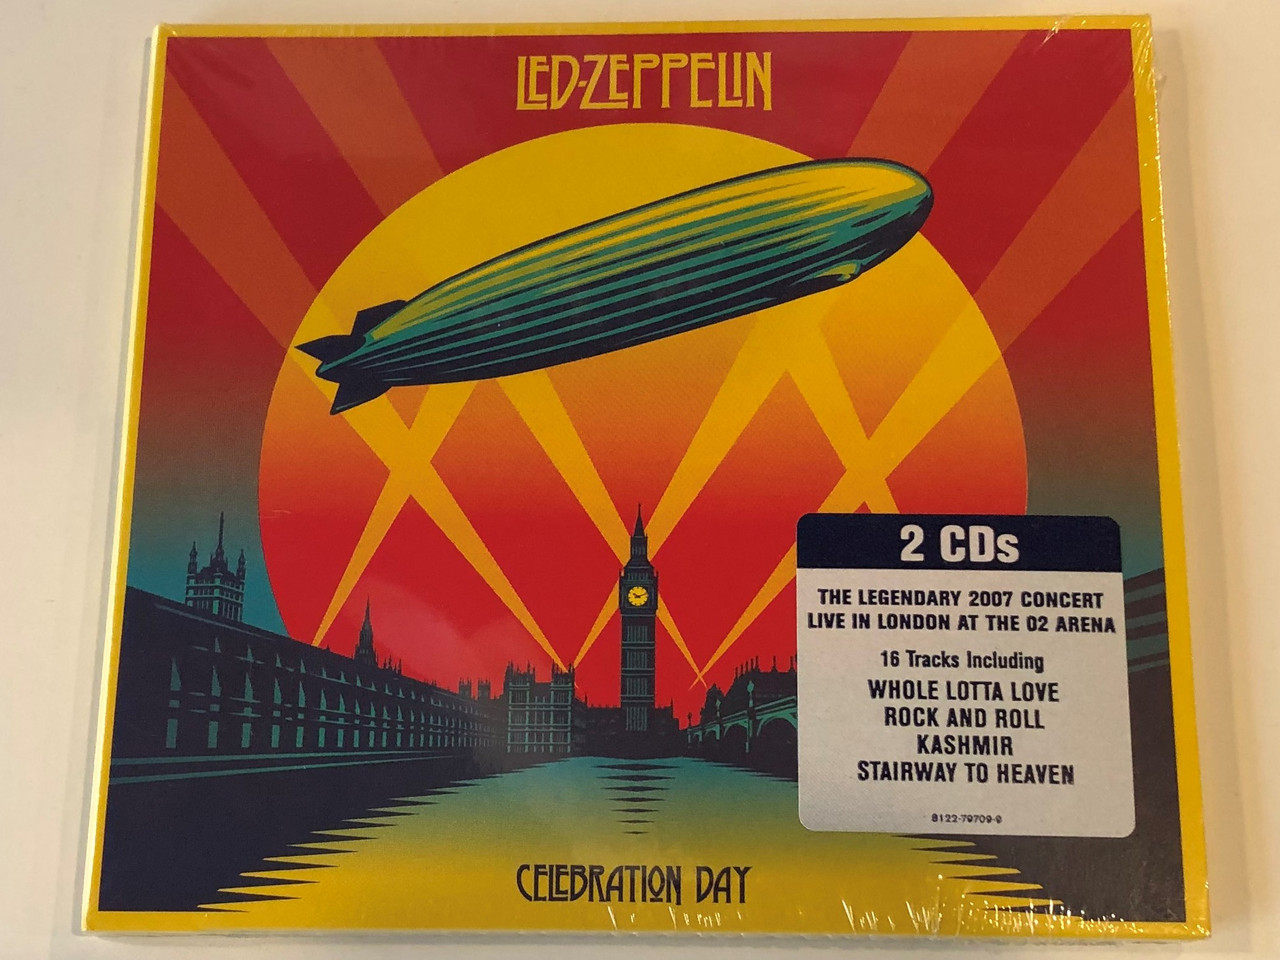 Led Zeppelin ‎– Celebration Day / The Legendary 2007 Concert Live In London  At The 02 Arena / 16 Tracks Including Whole Lotta Love, Rock And Roll,  Kashmir, Stairway To Heaven / Swan Song ‎2x Audio CD 2012 / 8122-79709-9 -  bibleinmylanguage